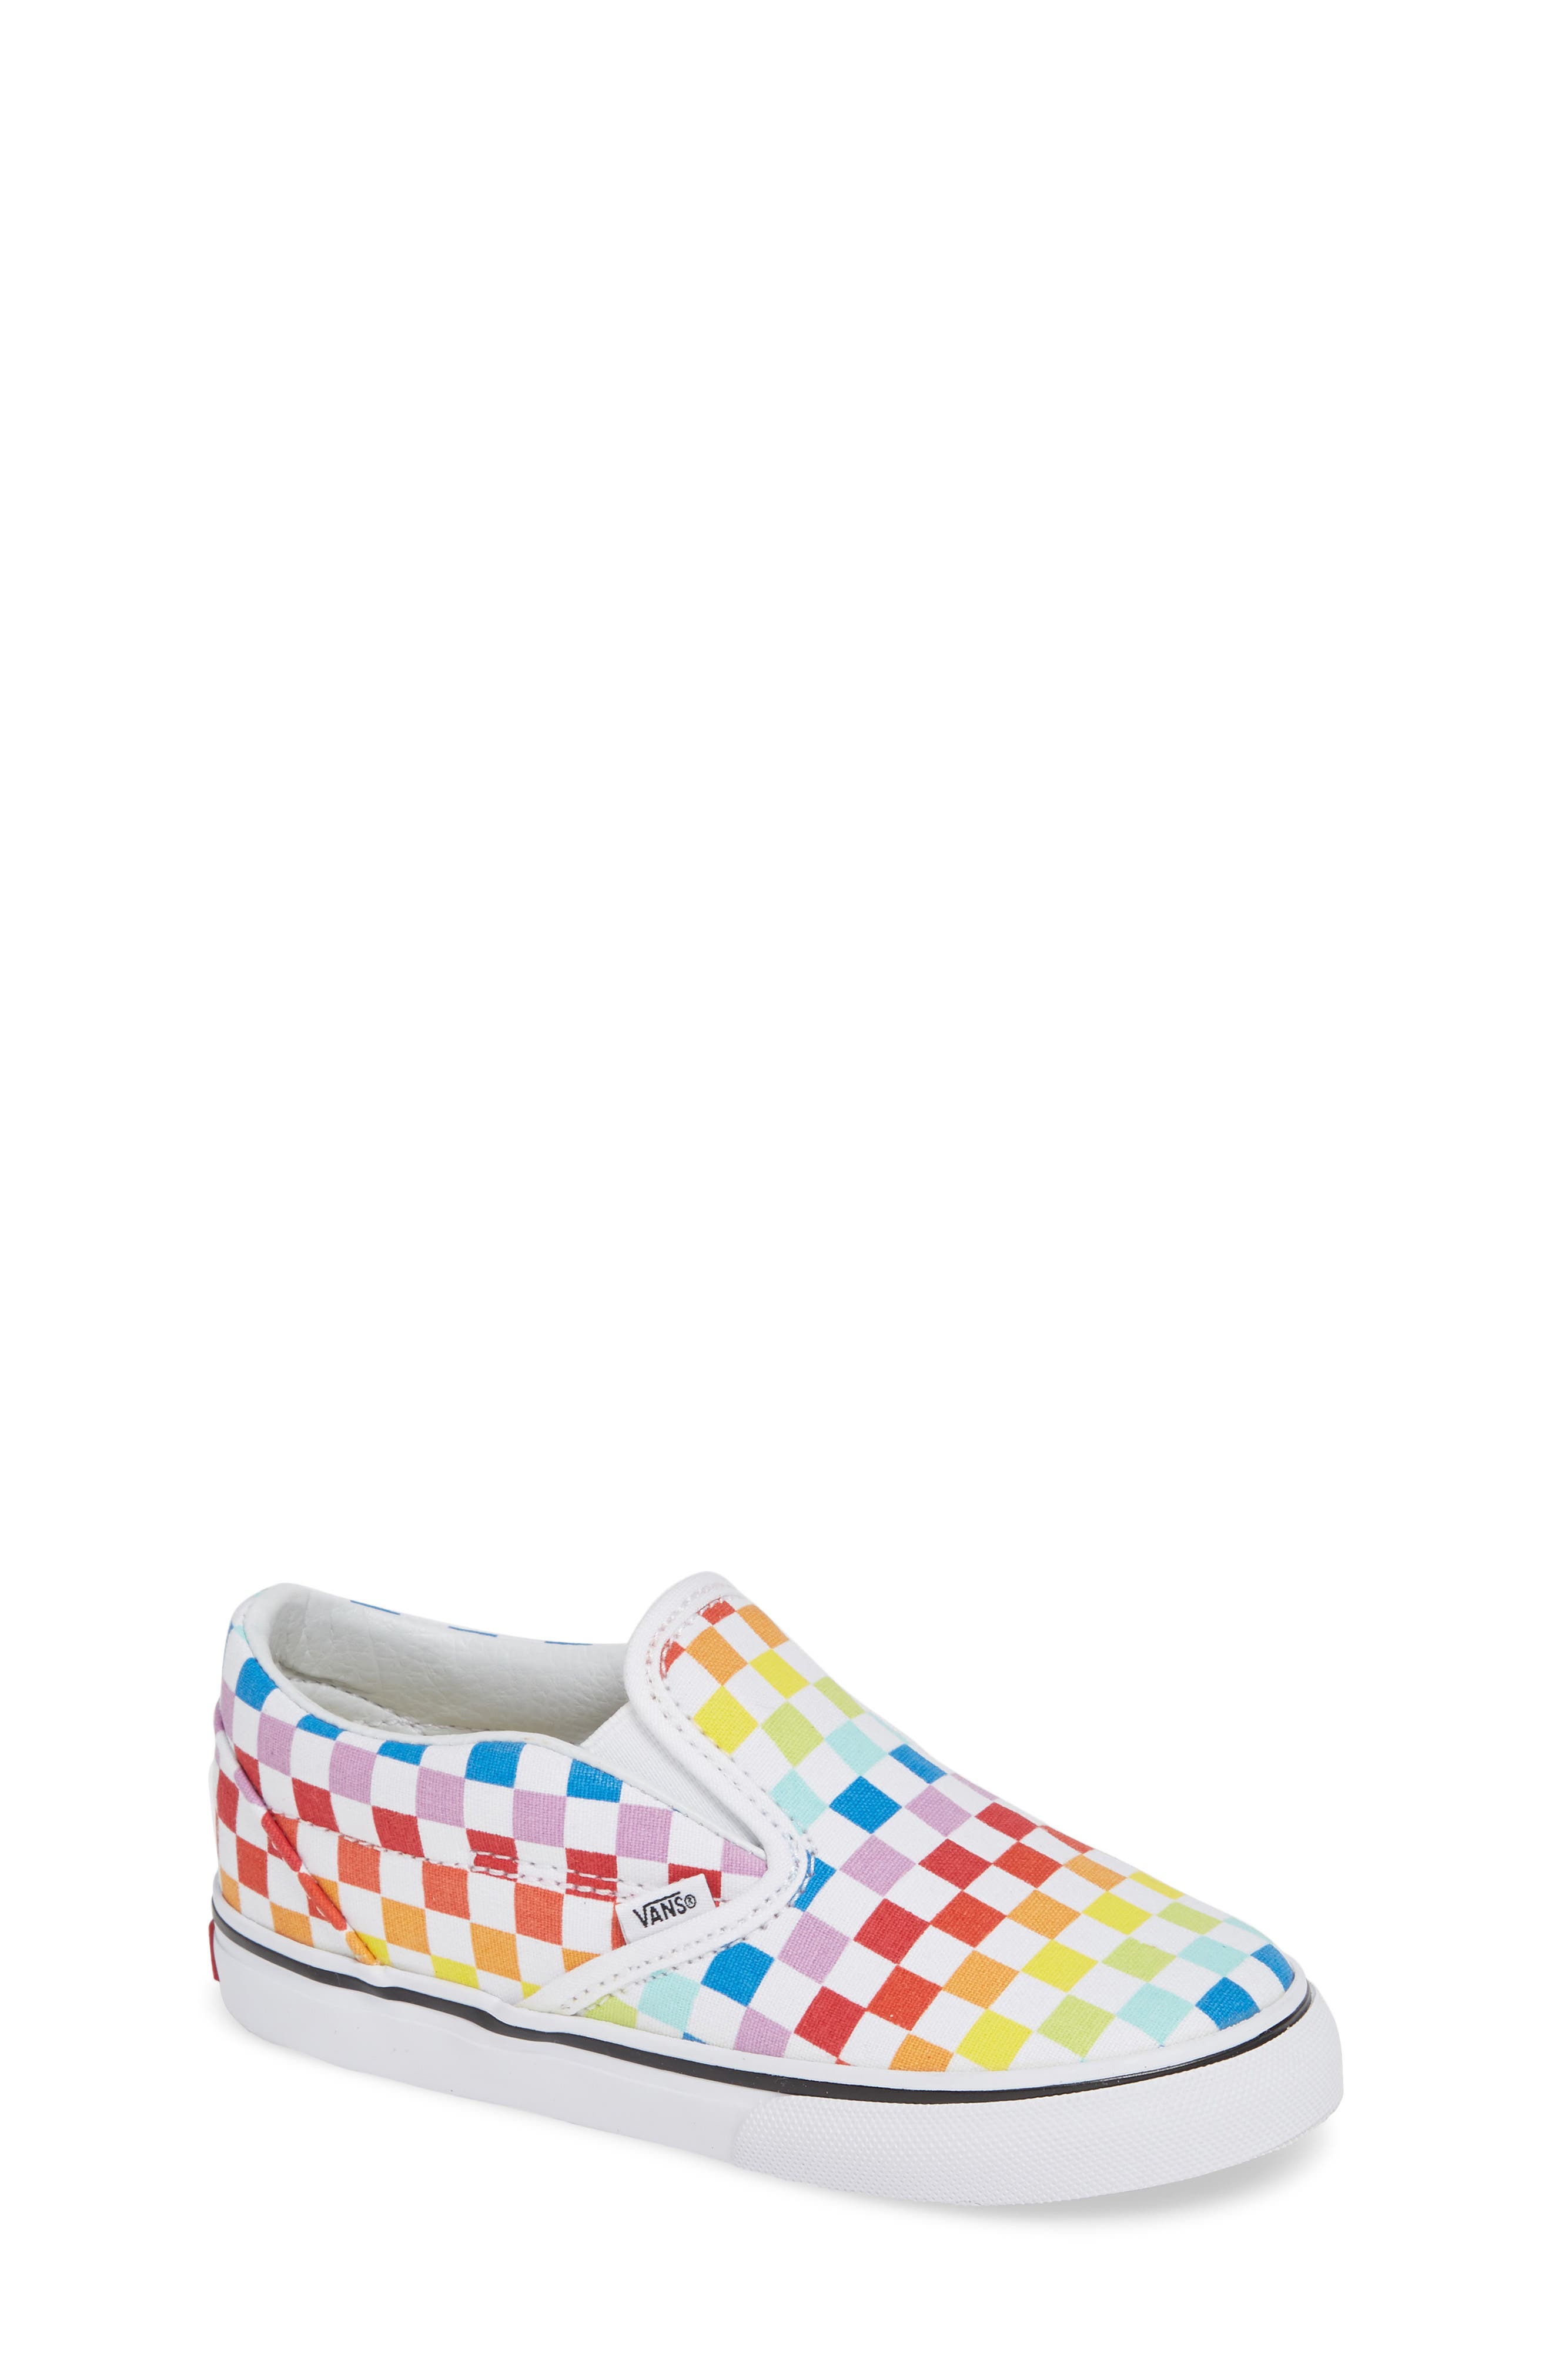 youth size 4 checkered vans